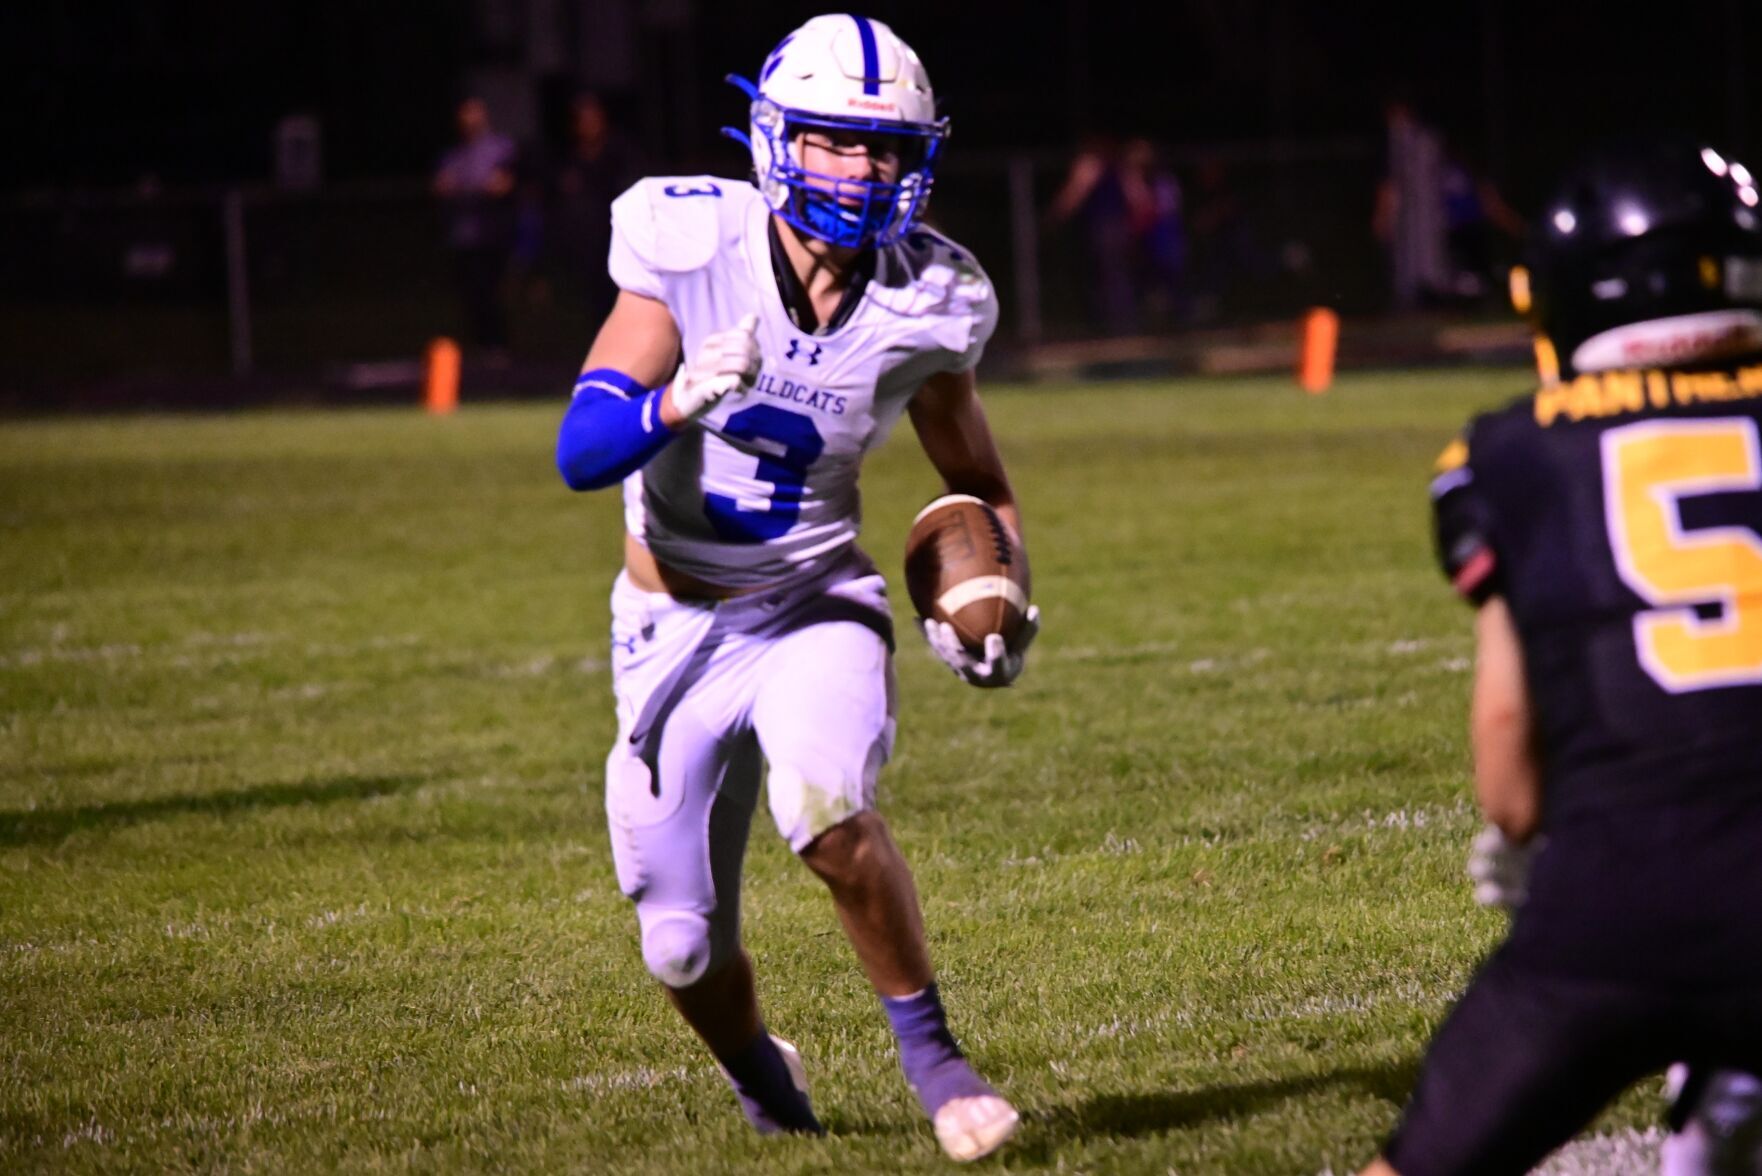 Akron-Westfield, OABCIG, Remsen St. Mary’s, Spirit Lake, and Woodbury Central Win District Titles in Iowa High School Football